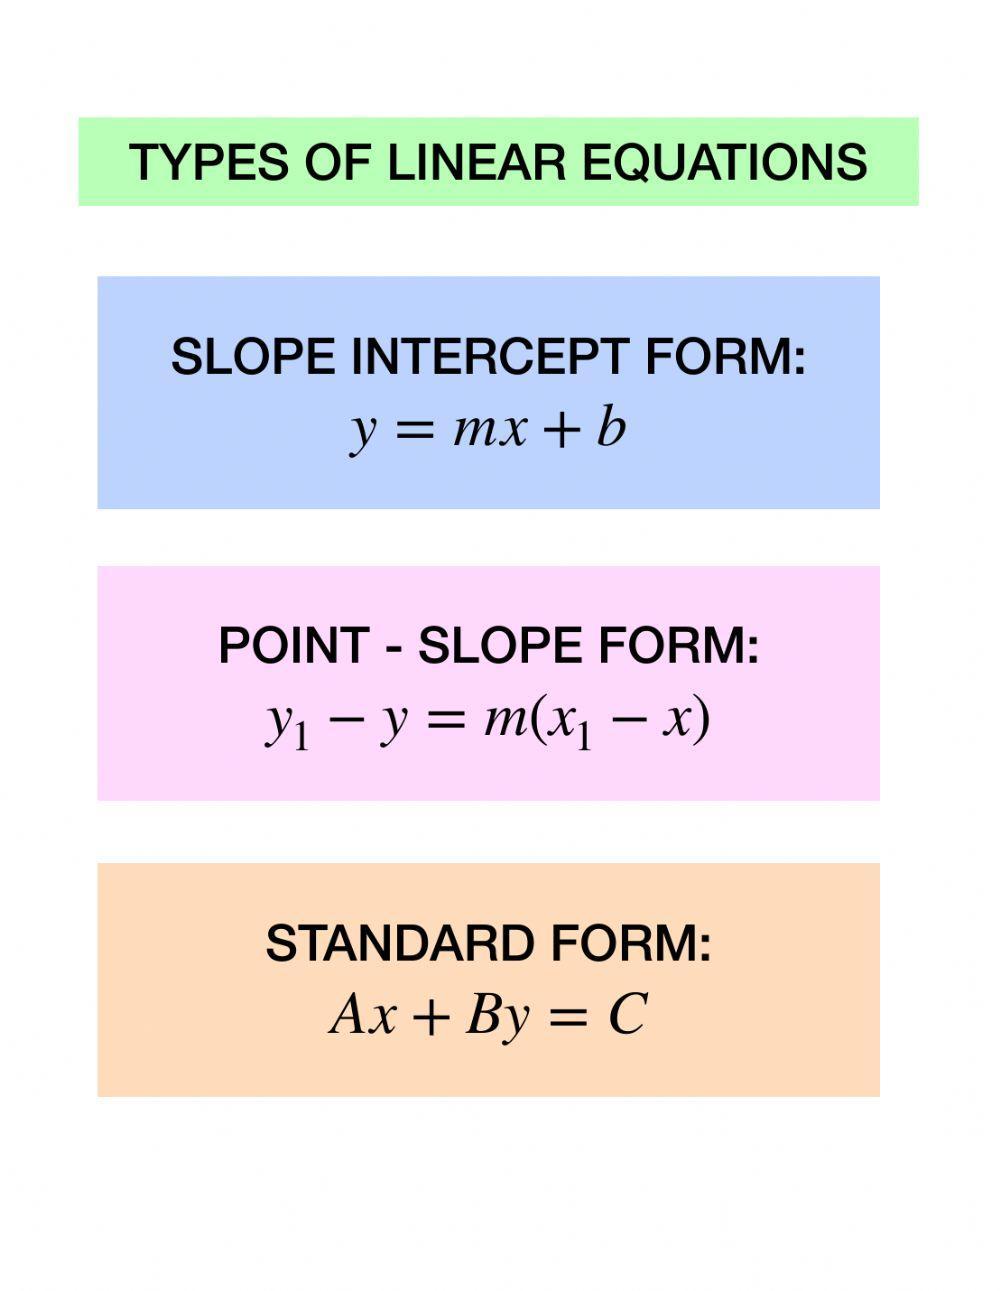 Types of Linear Equations